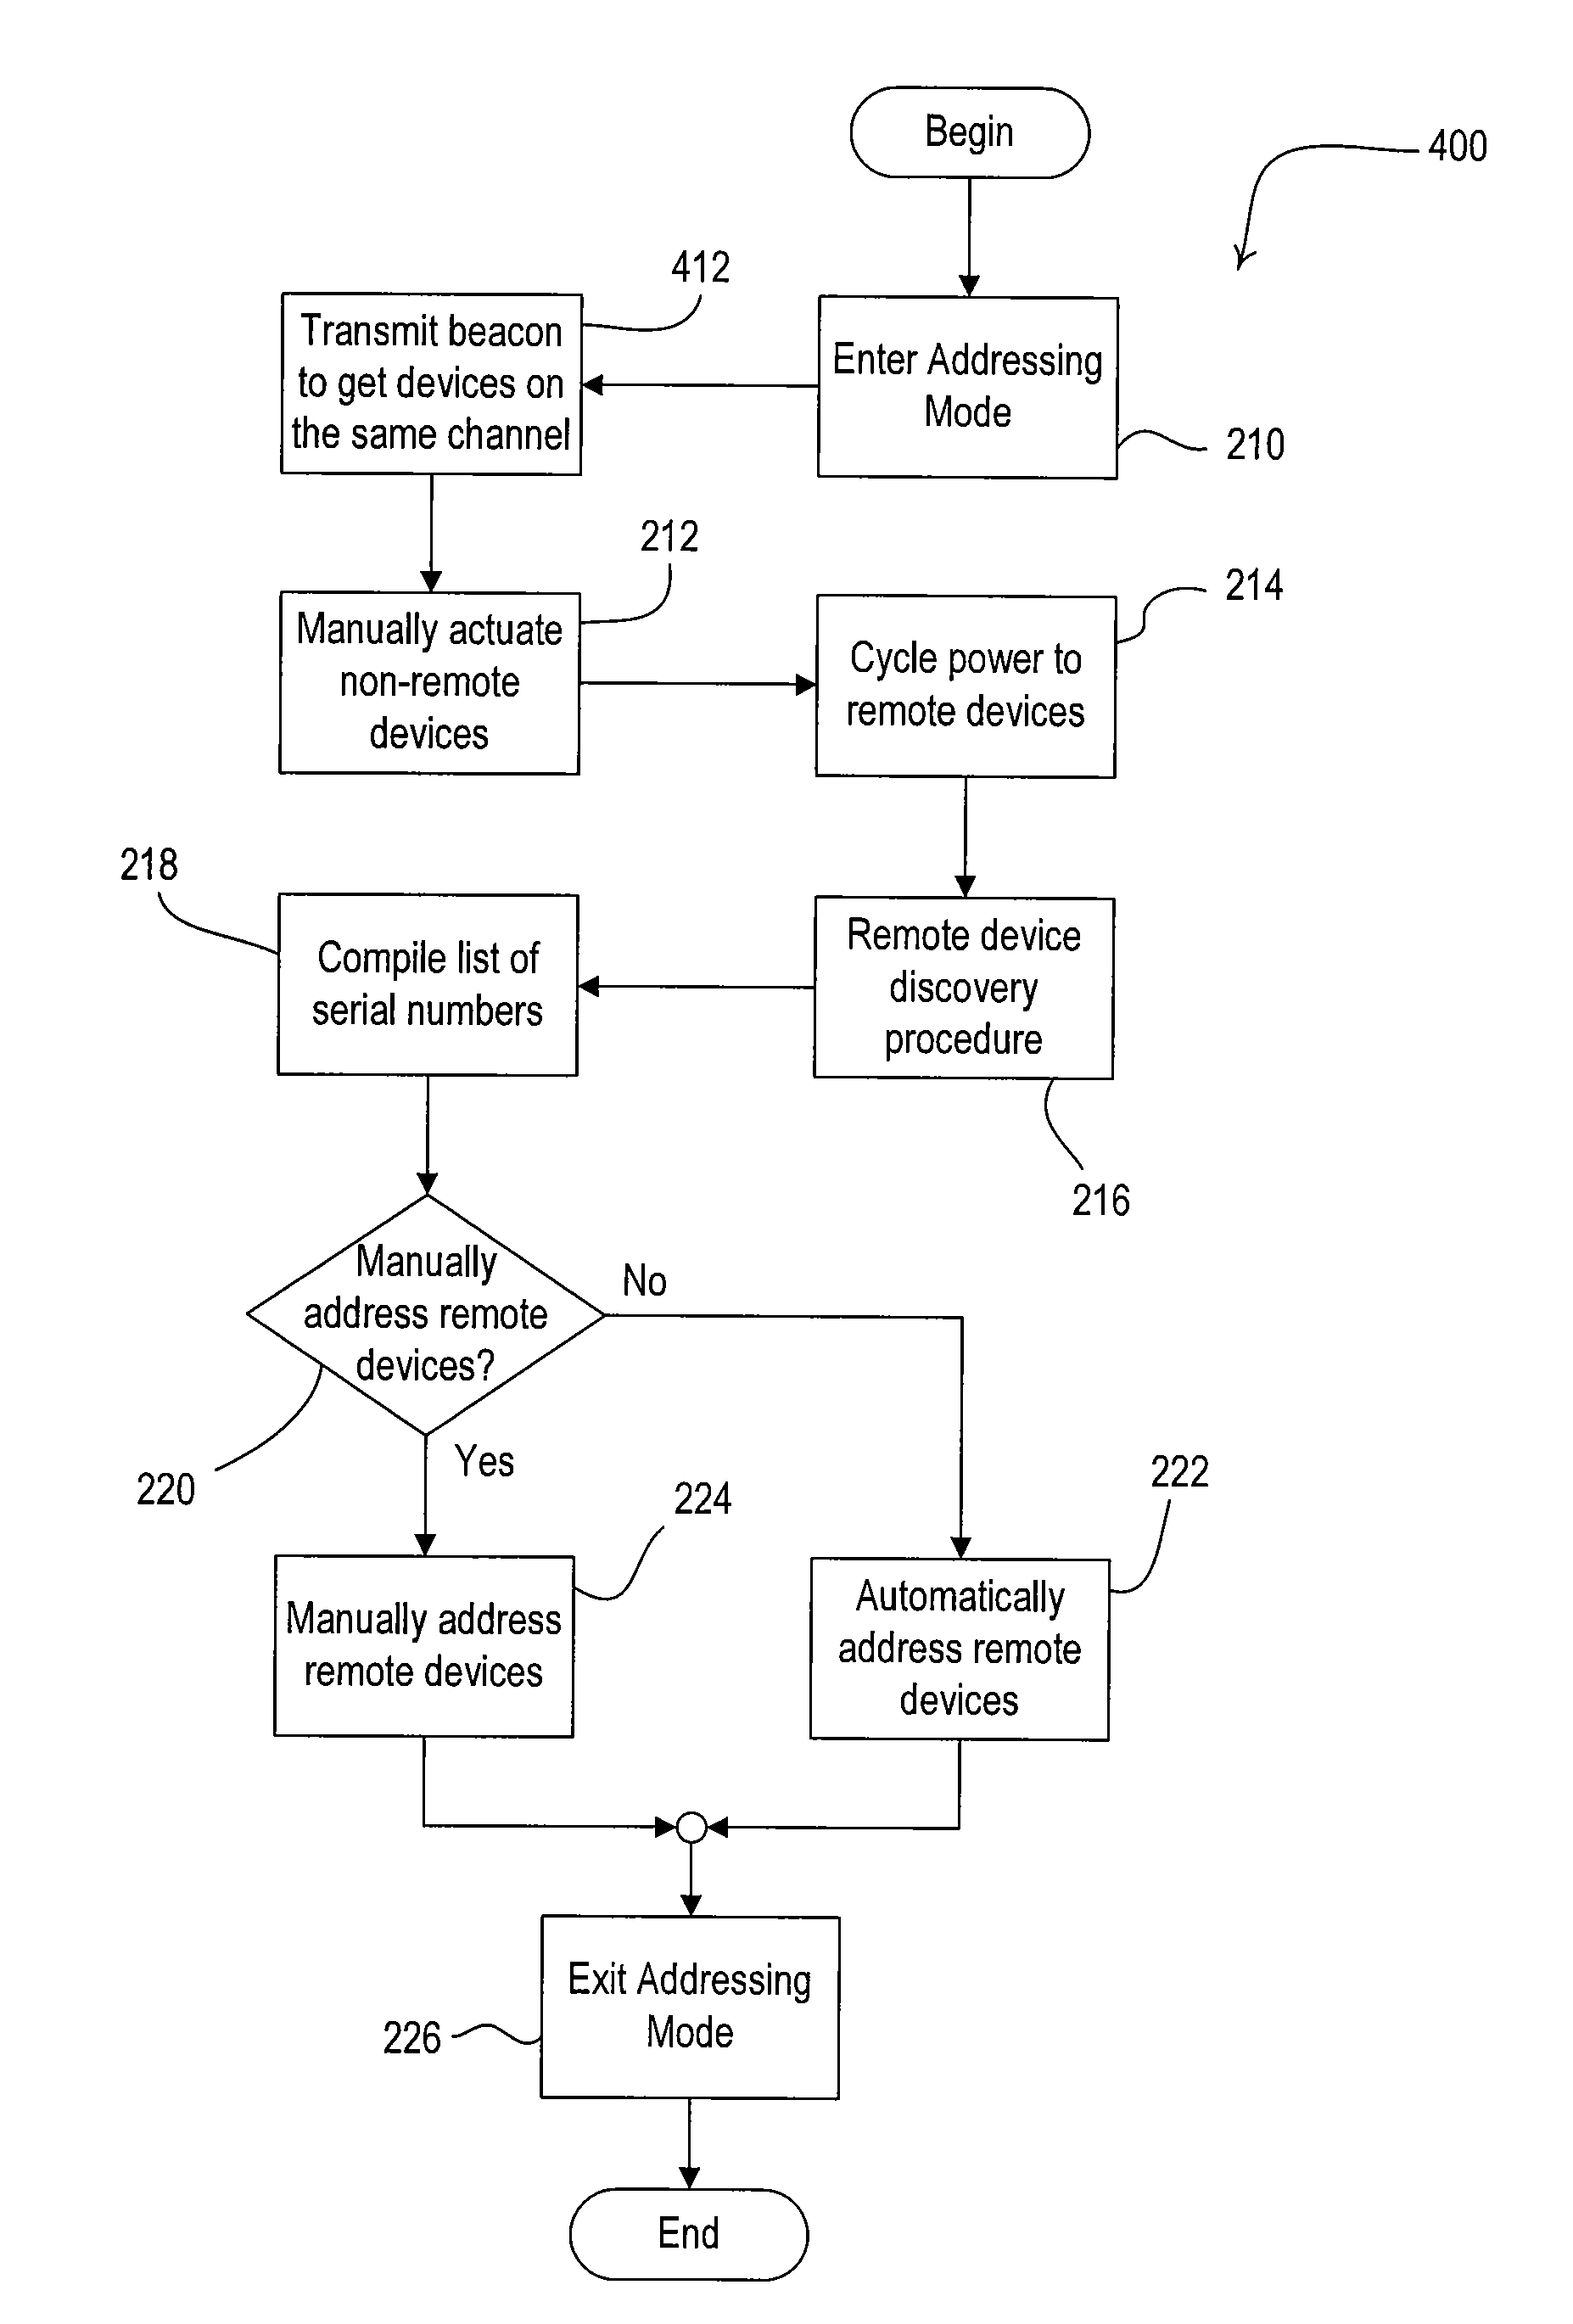 Procedure for addressing remotely-located radio frequency components of a control system